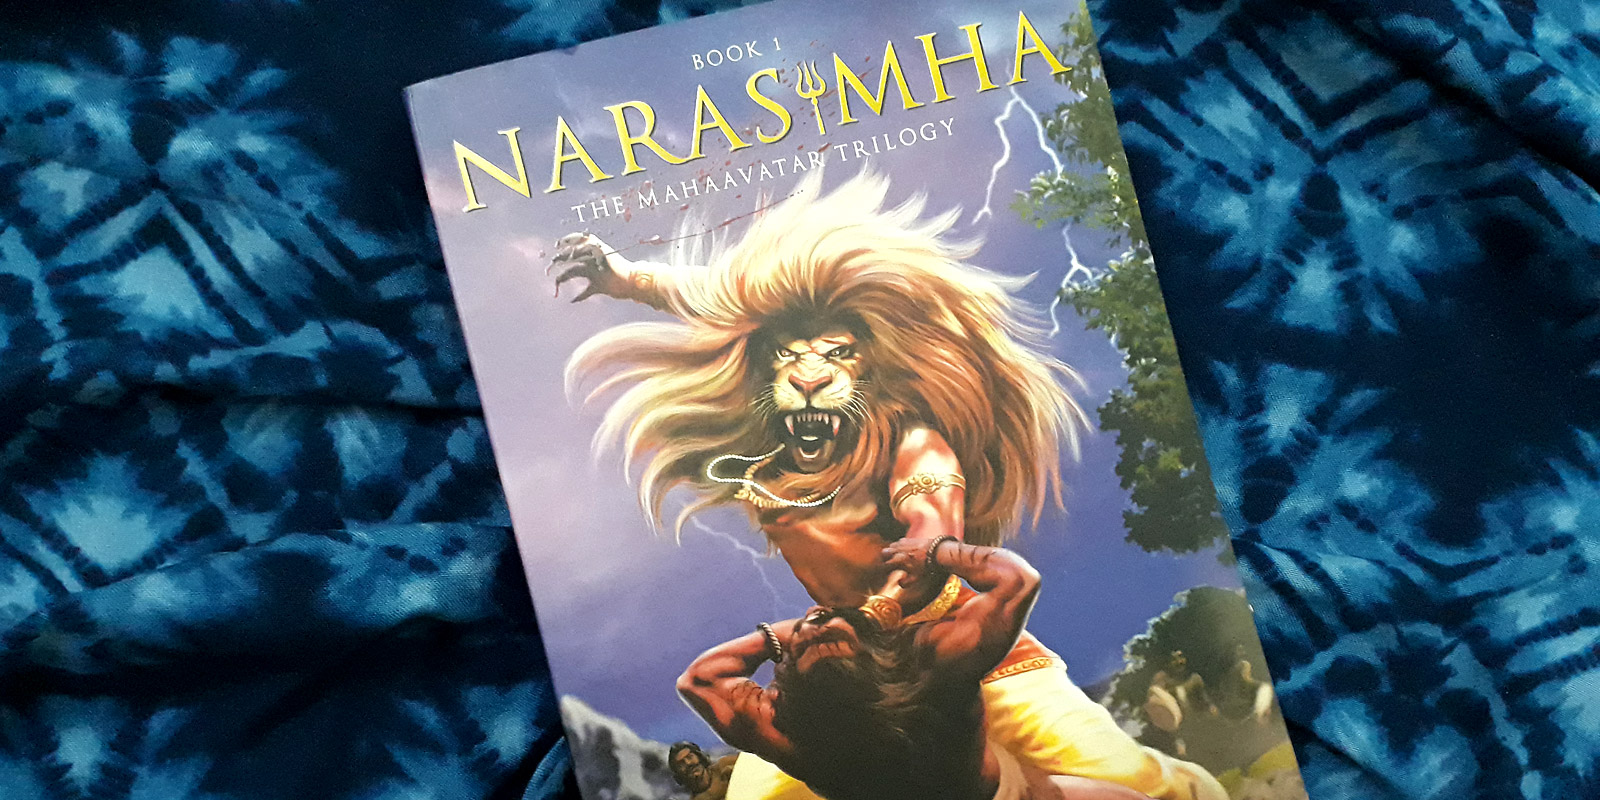 Prahlad (The Narasimha Trilogy #3) by Kevin Missal